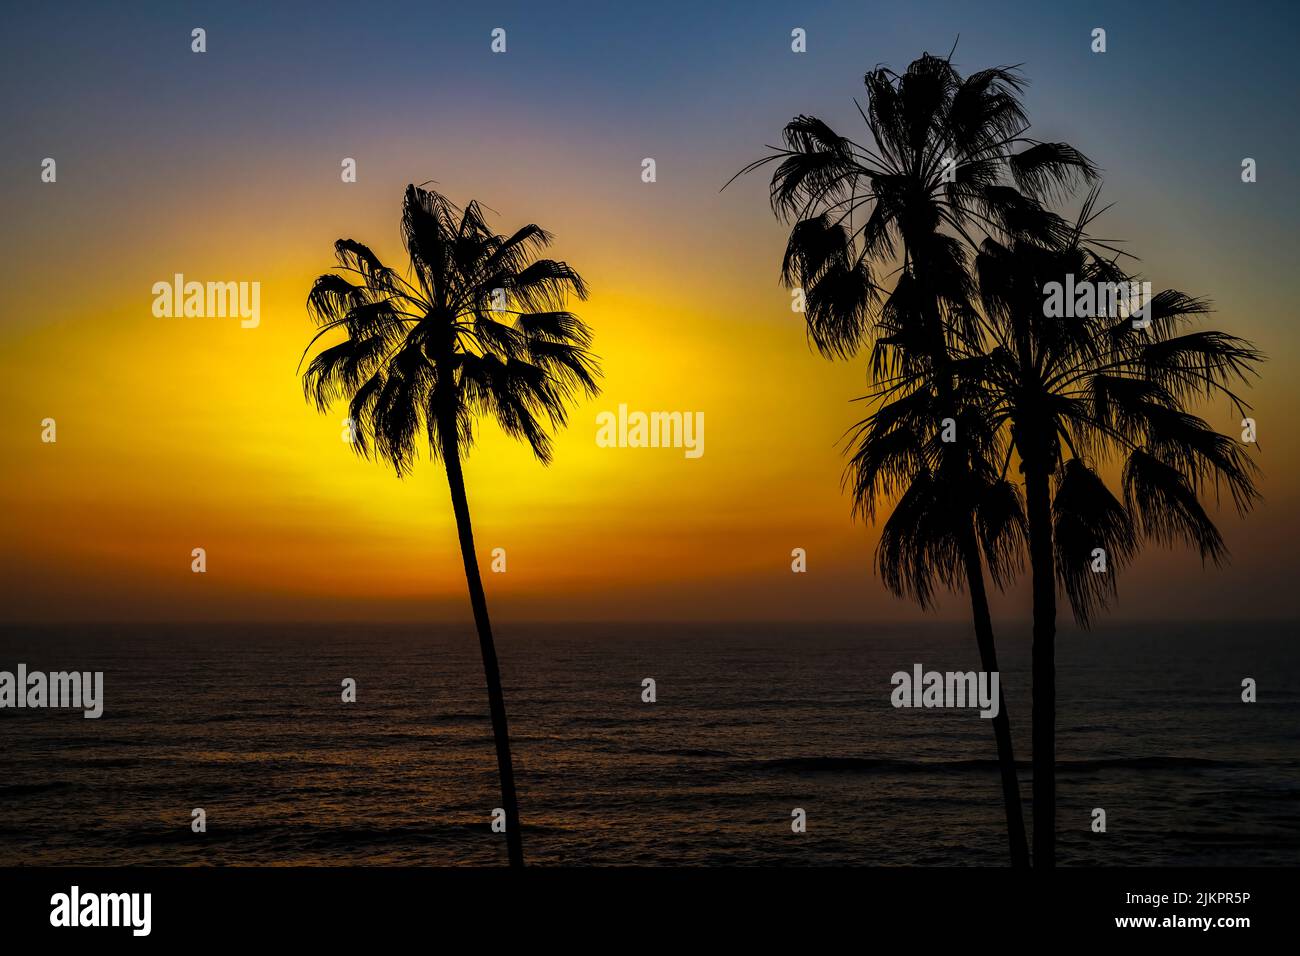 A BEAUTIFUL ORANGE SUNSET IN LA JOLLA CALIFORNIA WITH BACKLIT PALM TREES AND A CALM DARK PACIFIC OCEAN Stock Photo